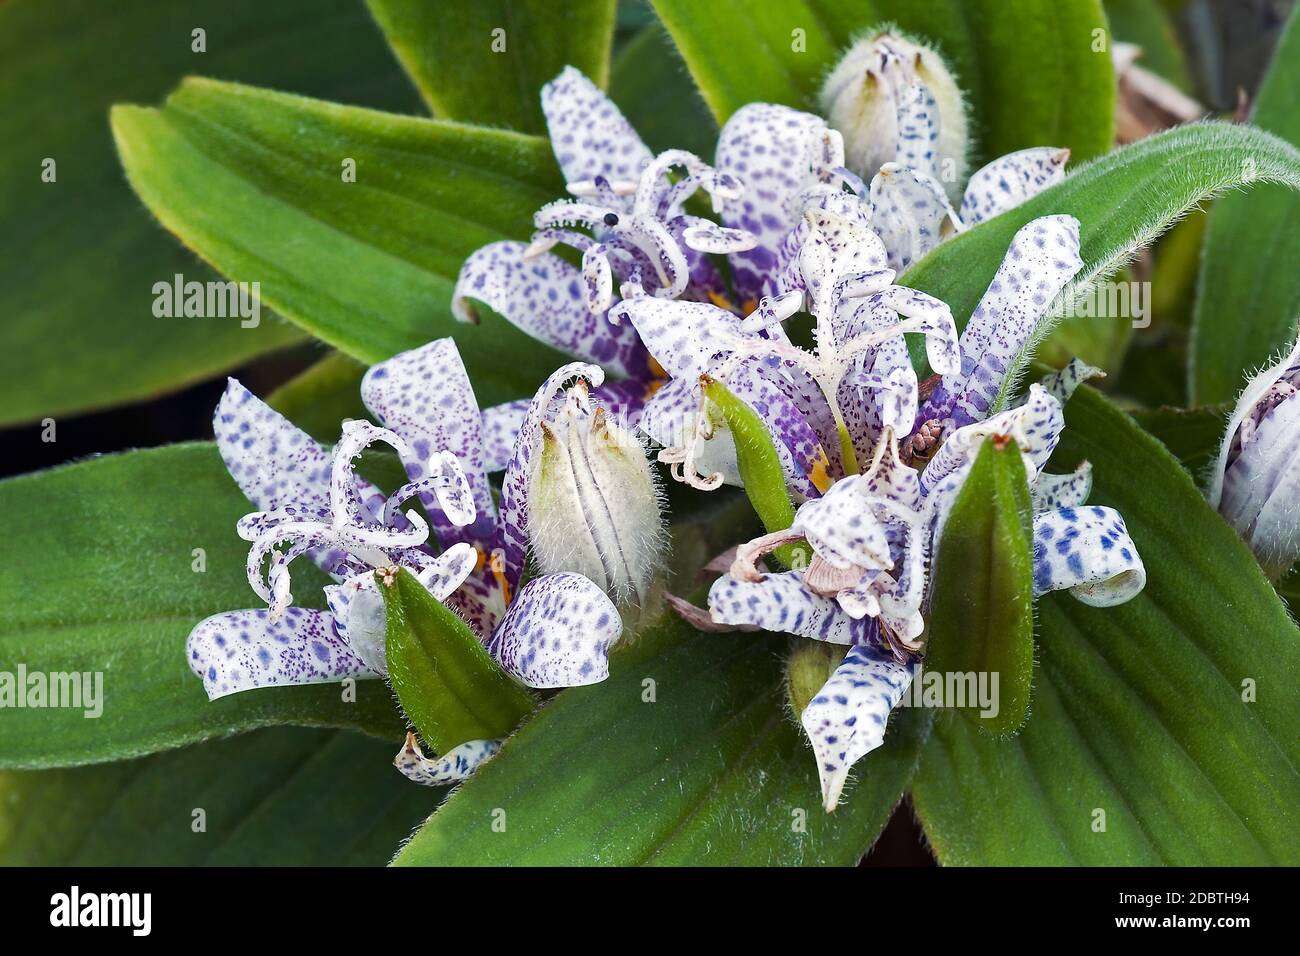 Toad lily (Tricyrtis hirta). Called Hairy toad lily. Another scientific name is Tricyrtis japonica. Stock Photo